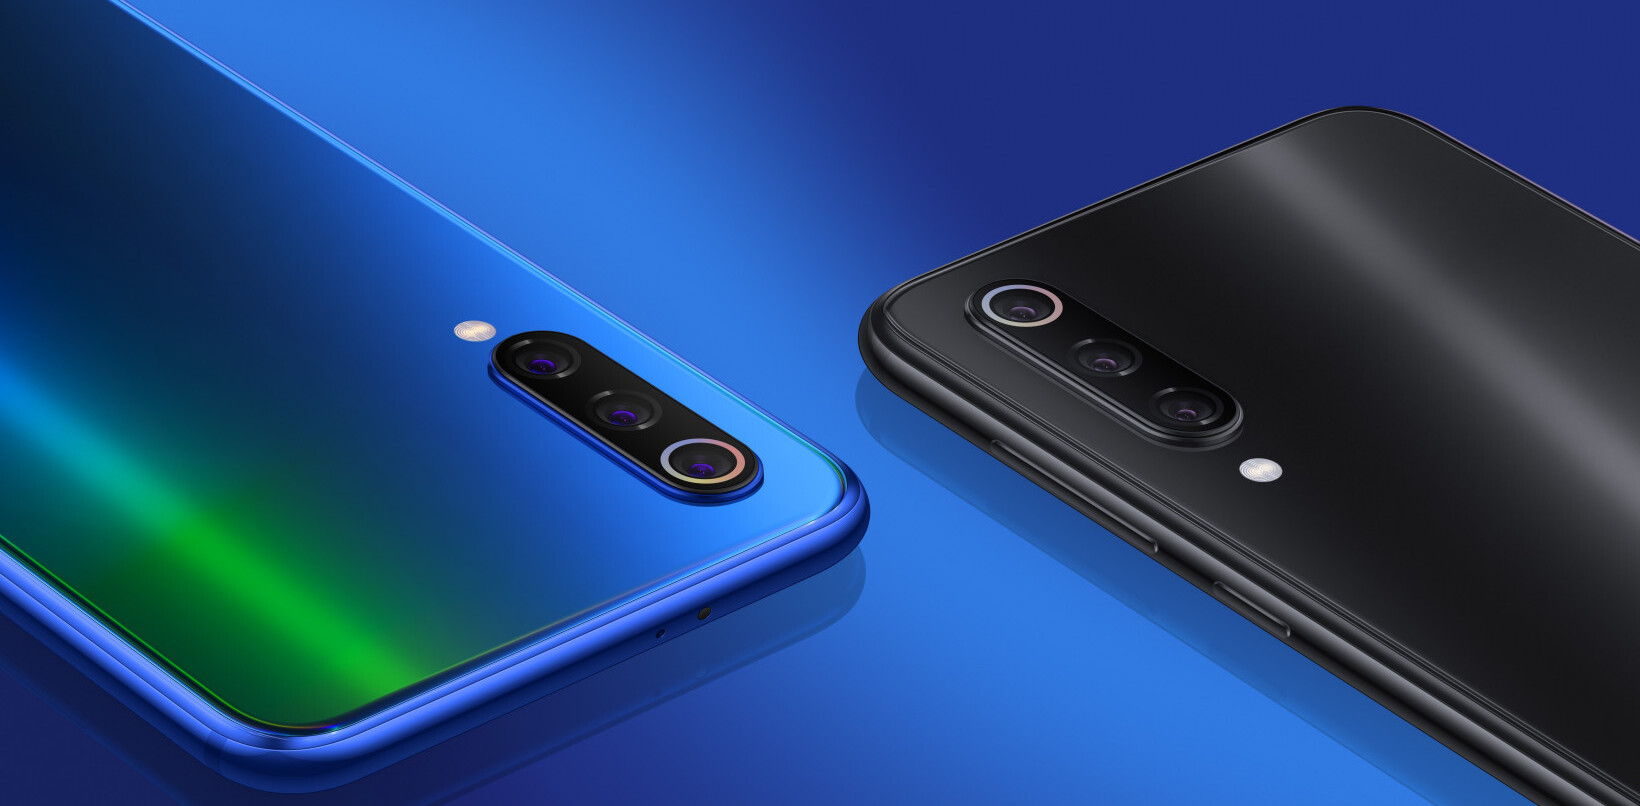 Xiaomi’s itsy-bitsy Mi 9 SE flagship is designed to be used with one hand